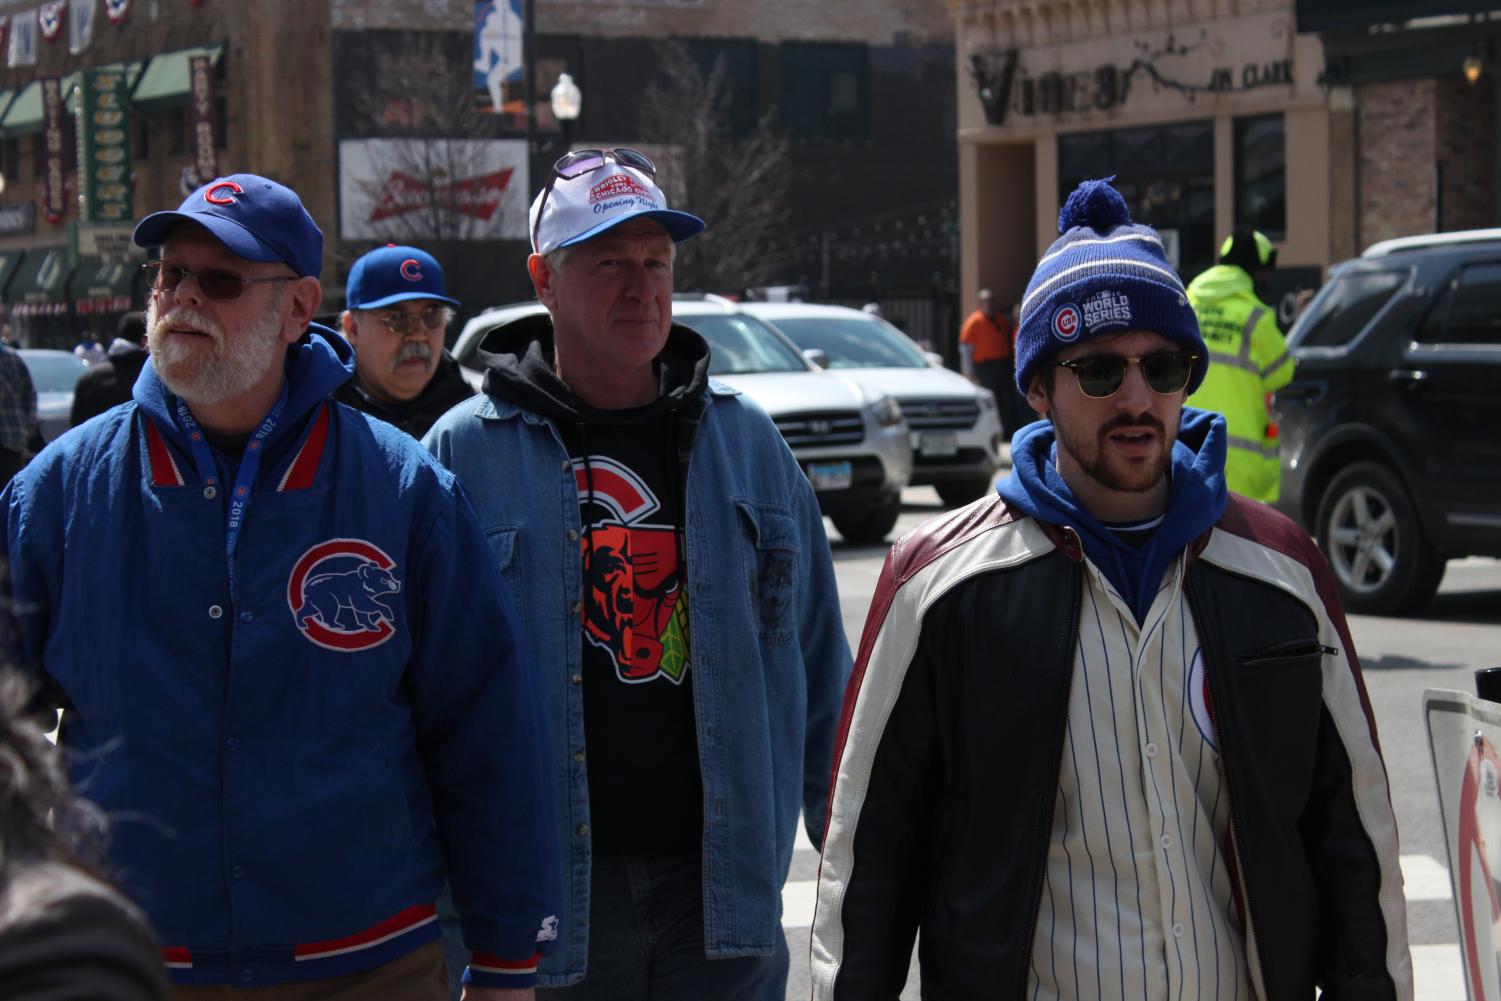 Cubs+snowed+out+in+home+opener